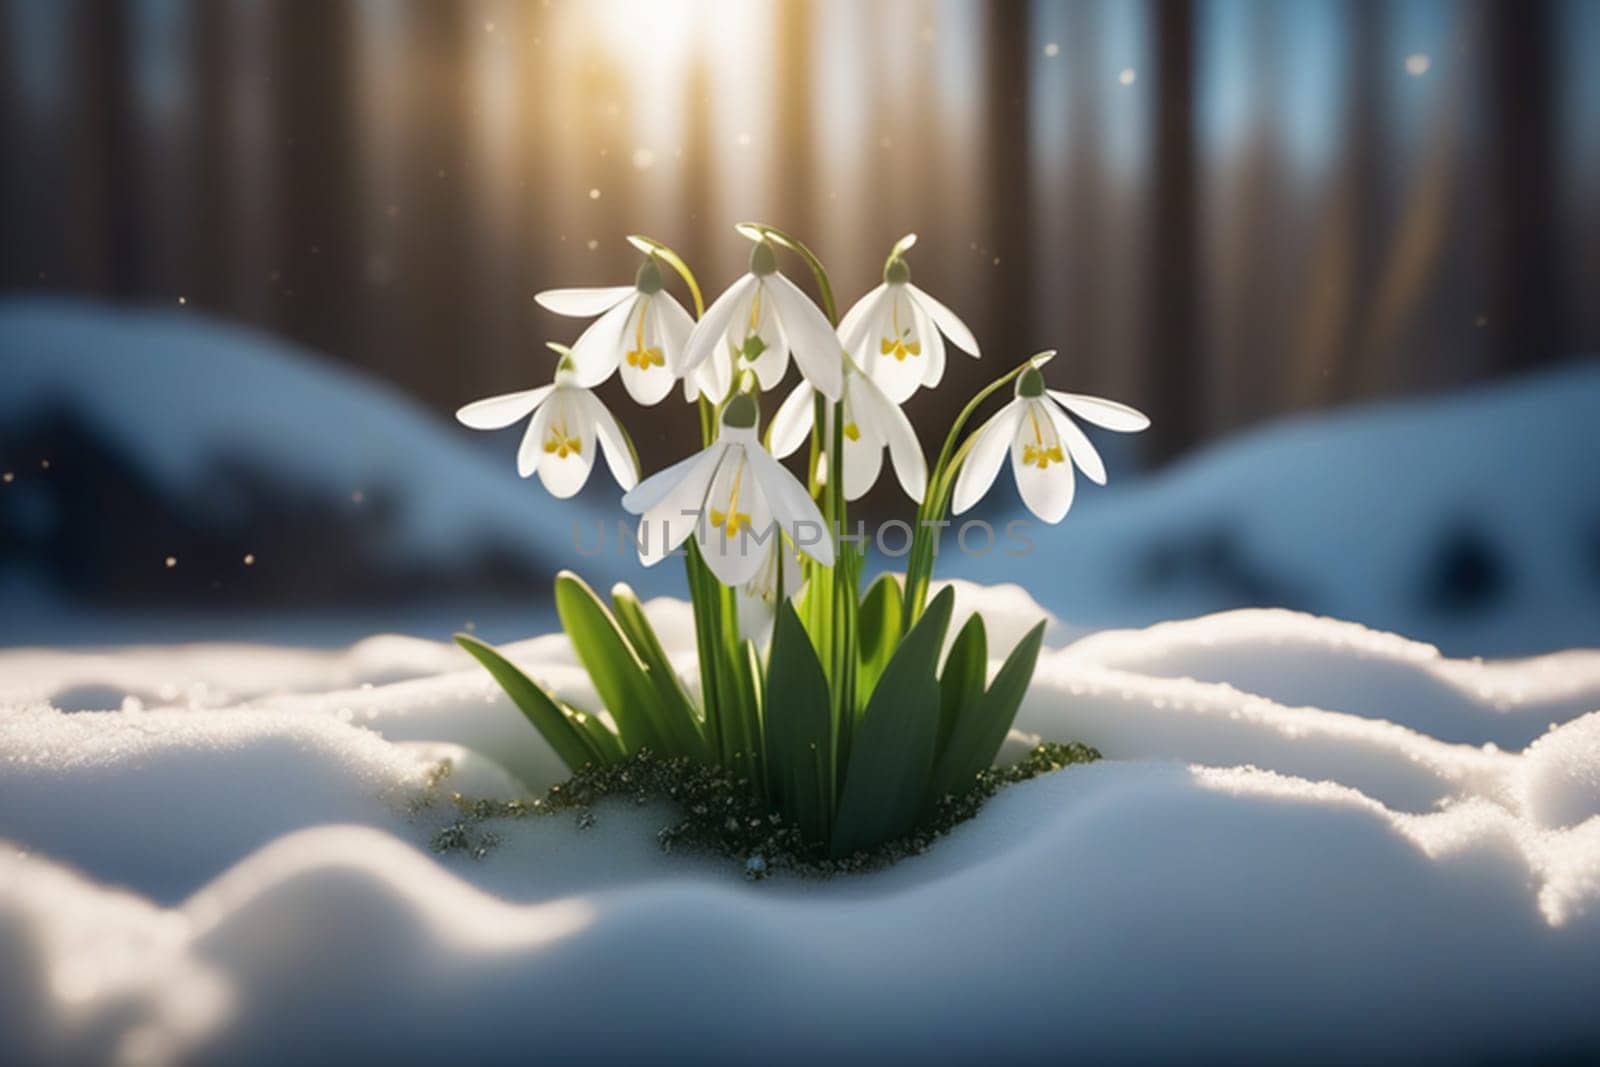 Beautiful first snowdrop flowers in the spring forest. Delicate spring flowers, snowdrops, are harbingers of warming and symbolize the arrival of spring. Scenic view of a spring forest with blooming flowers.